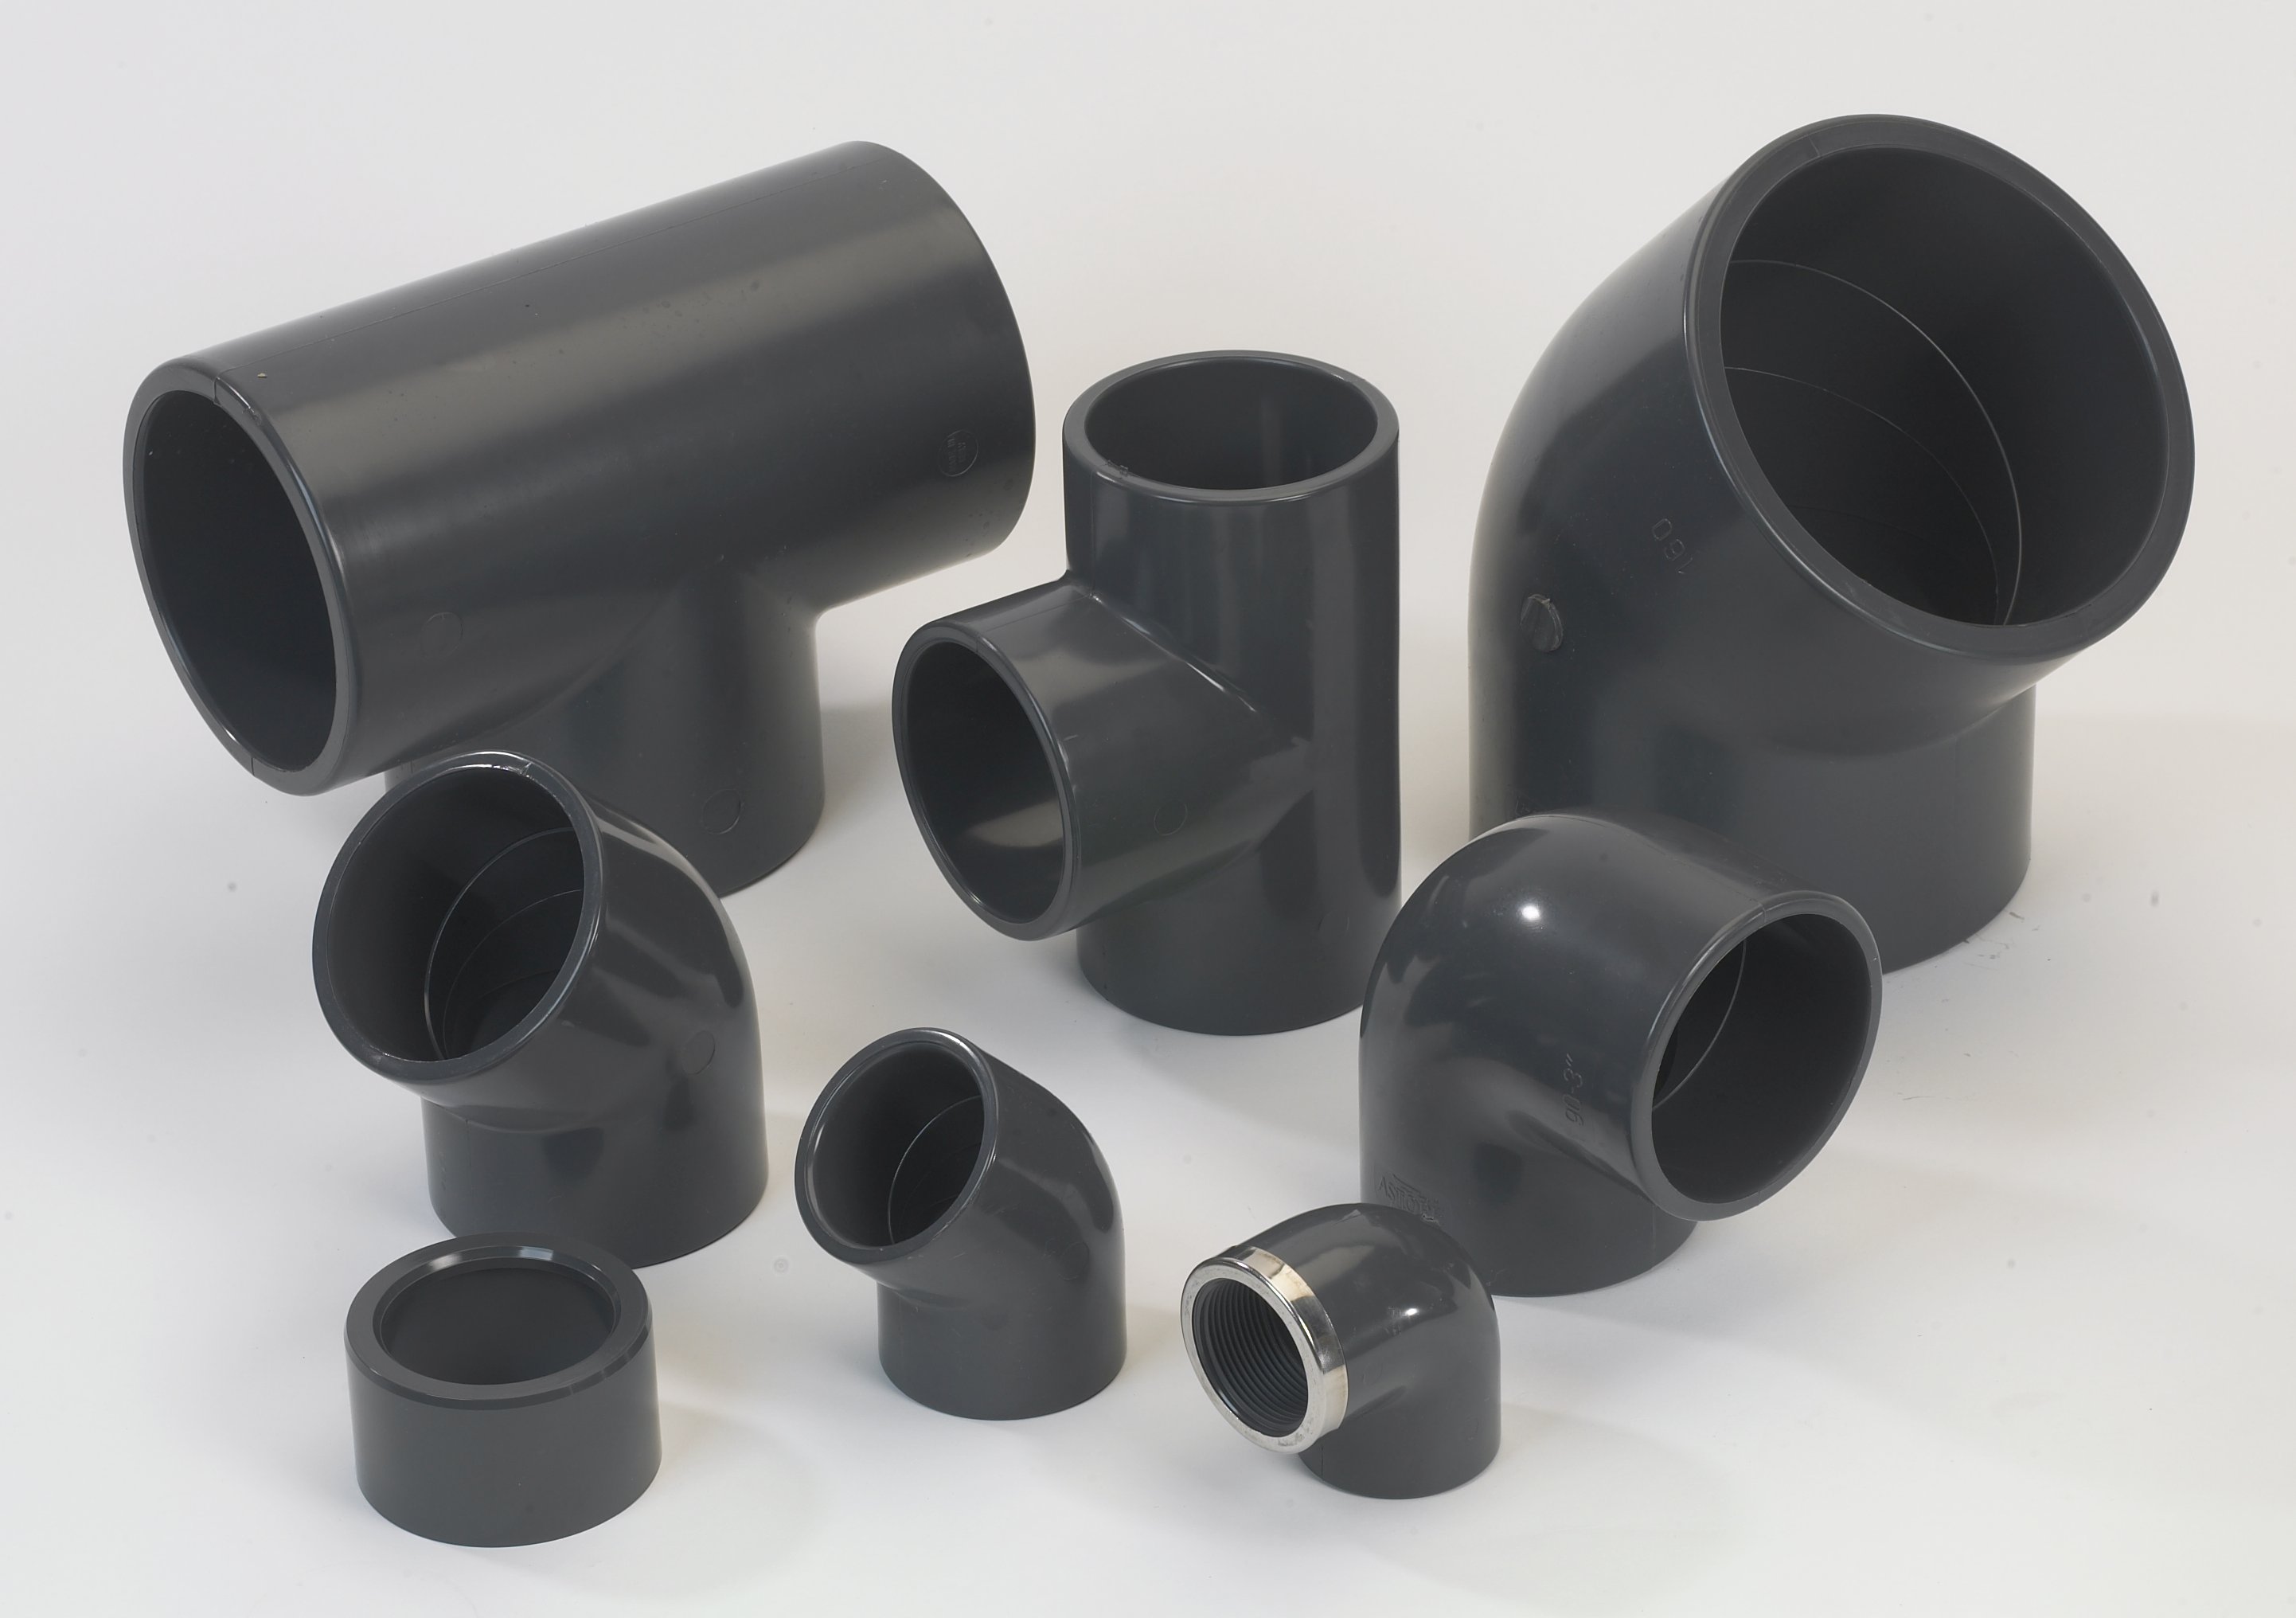 HDPE plastic pipe fittings